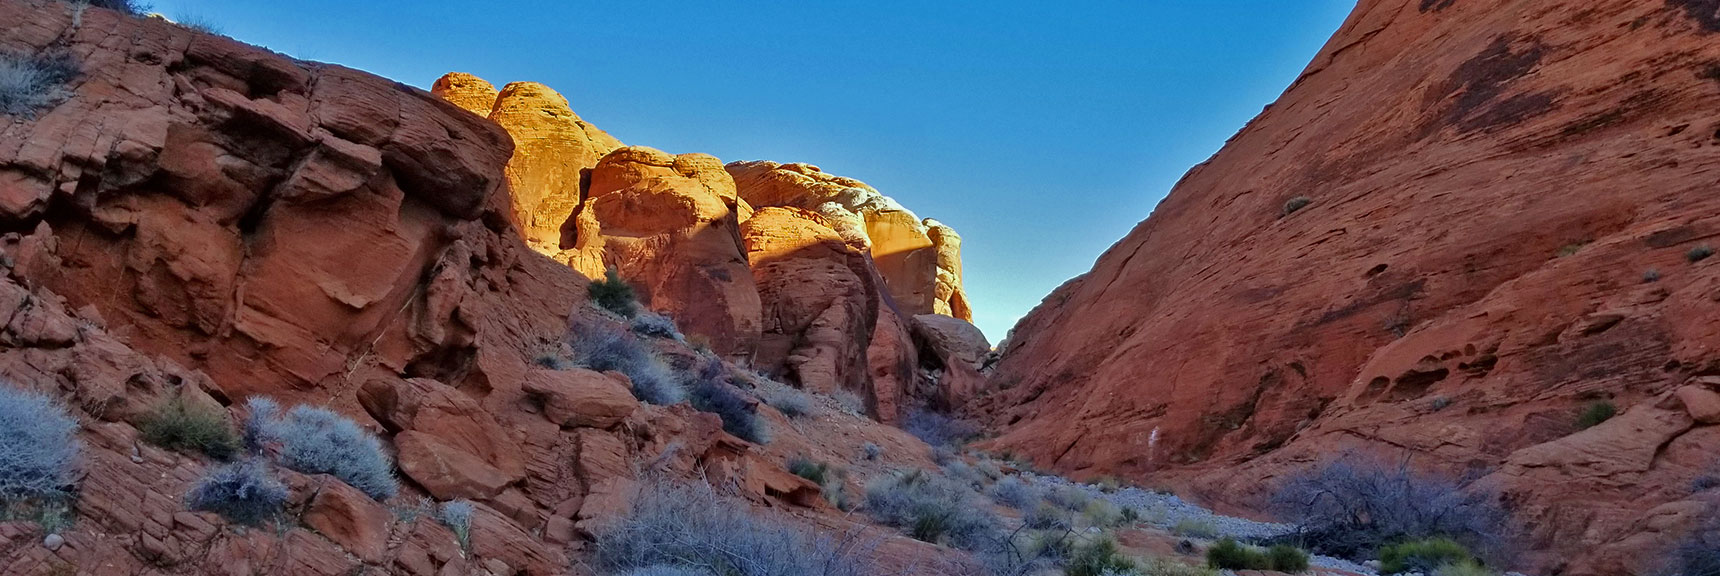 Descending Through the Northern Canyon Wash Toward White Domes on Prospect Trail in Valley of Fire State Park, Nevada